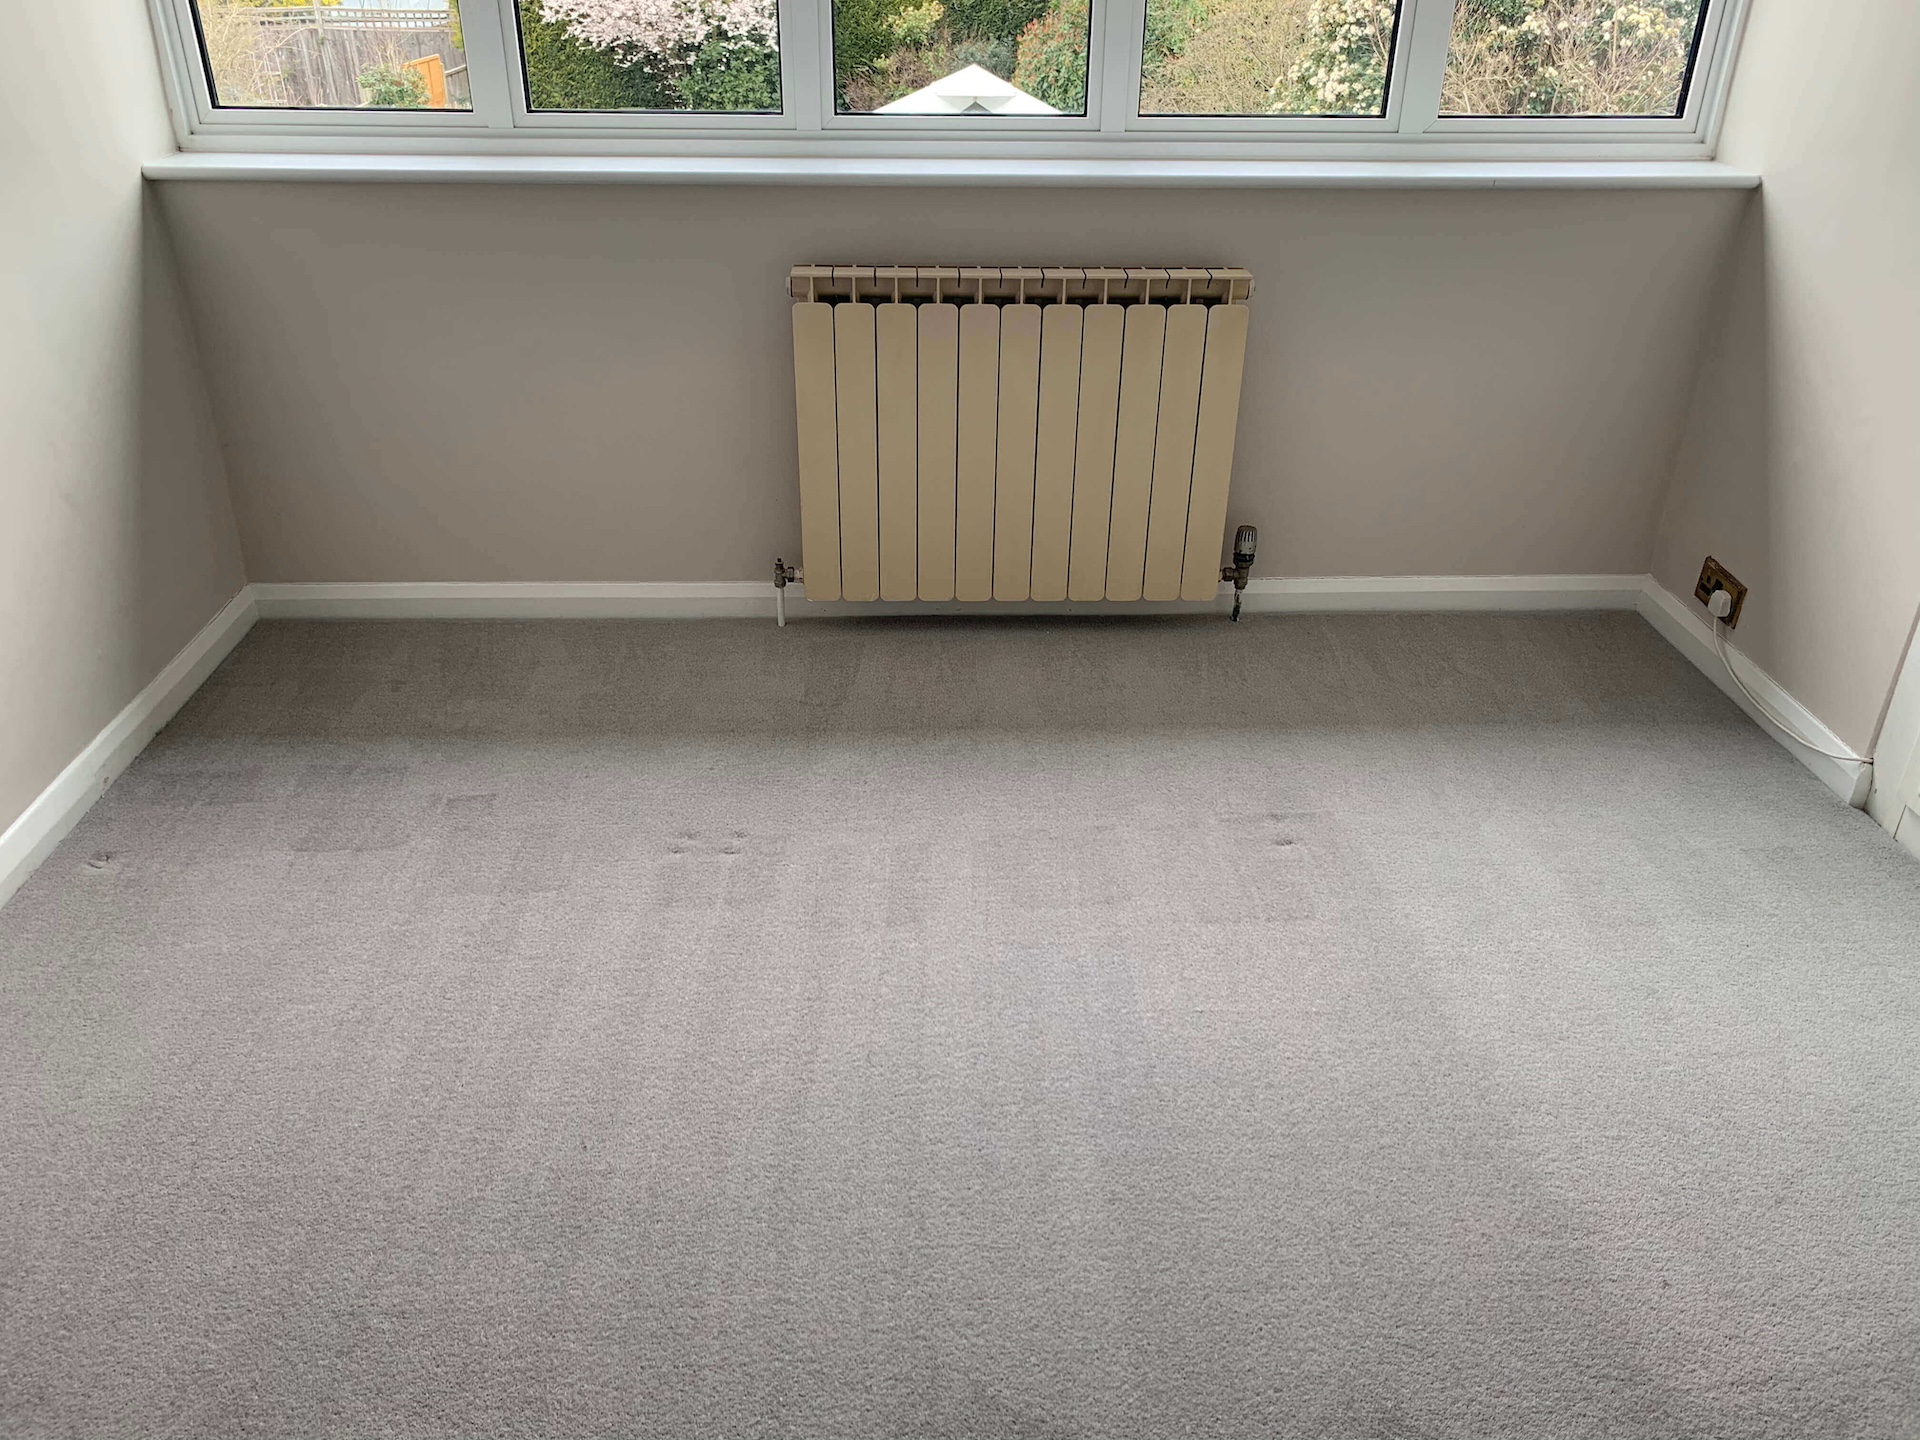 Spotlessly clean and refreshed carpeted bedroom in Battersea SW11, perfectly prepared for new tenants following a comprehensive after tenancy clean service.